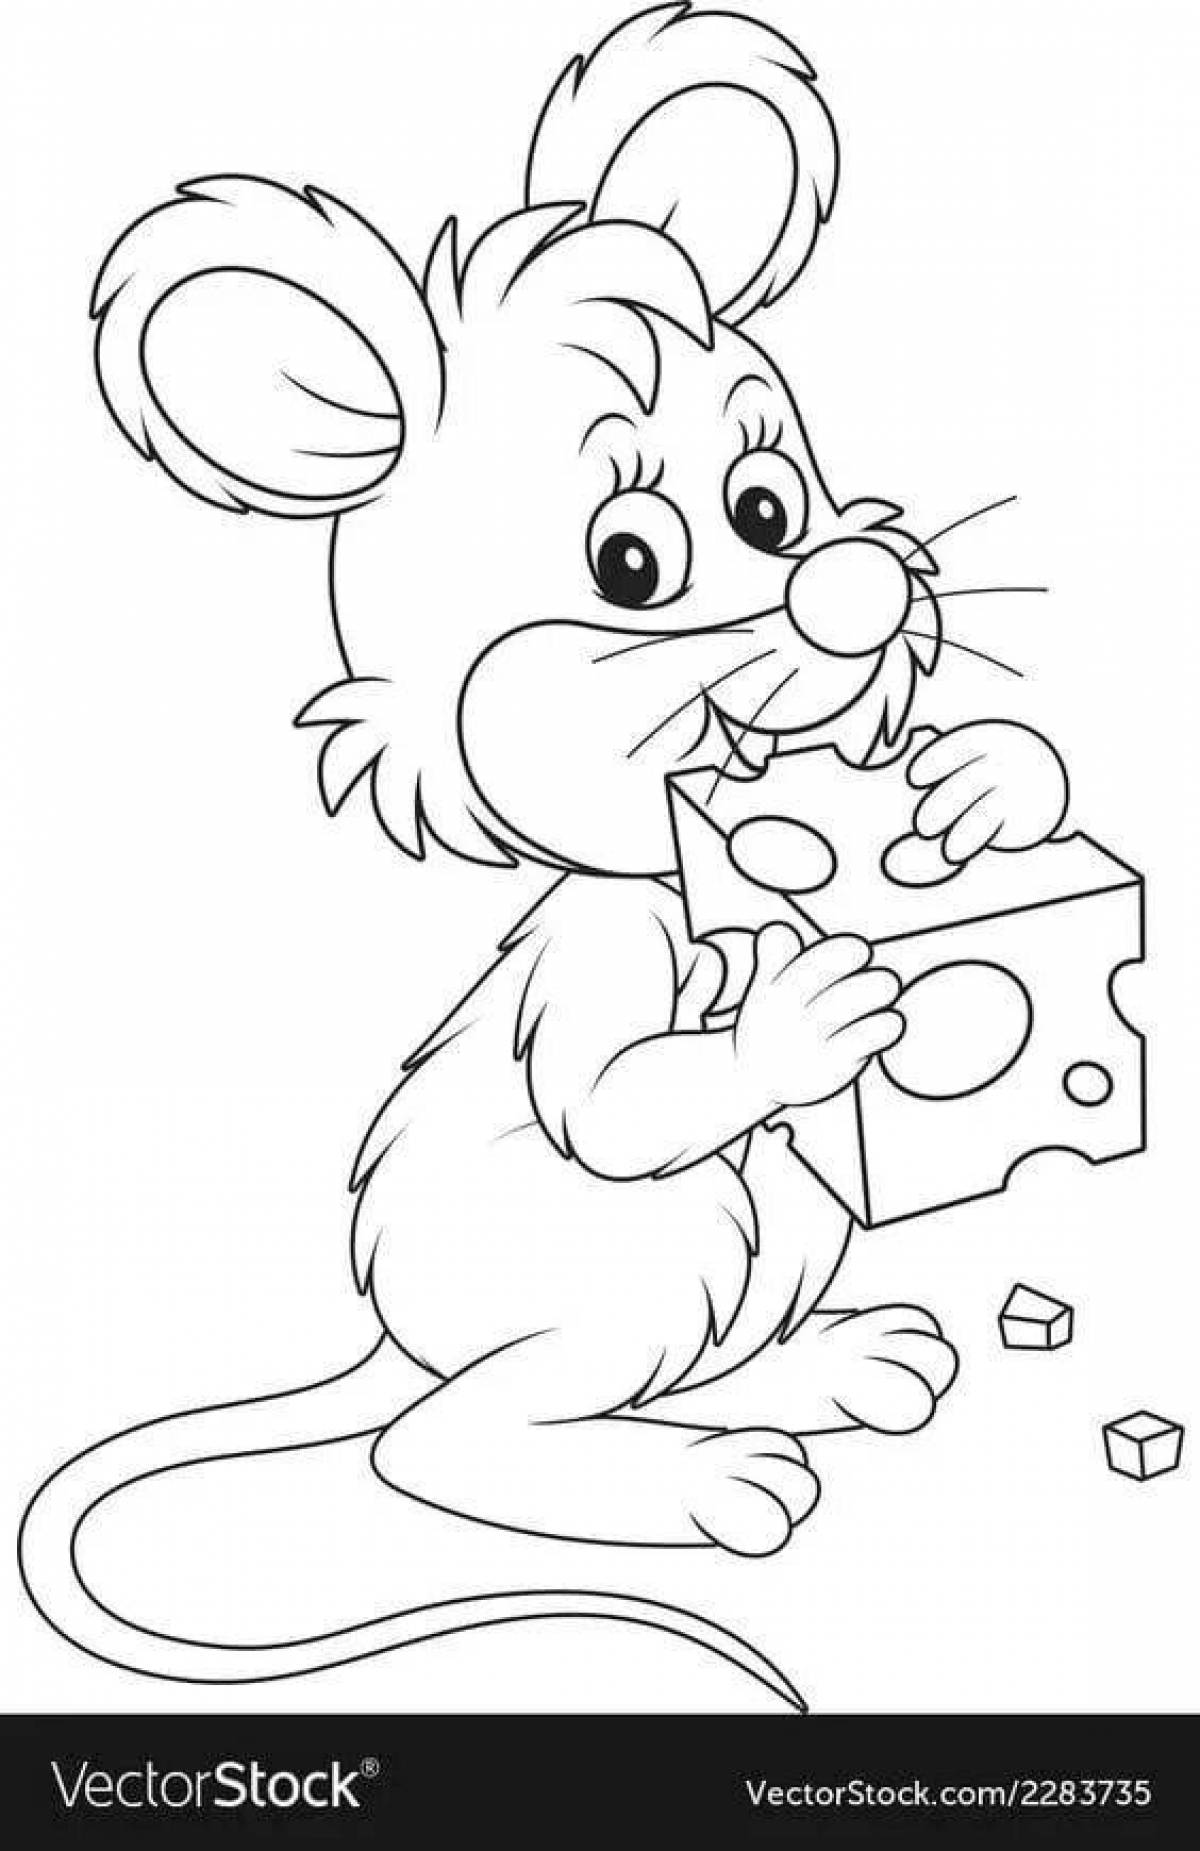 Attracting Mouse with Cheese coloring page